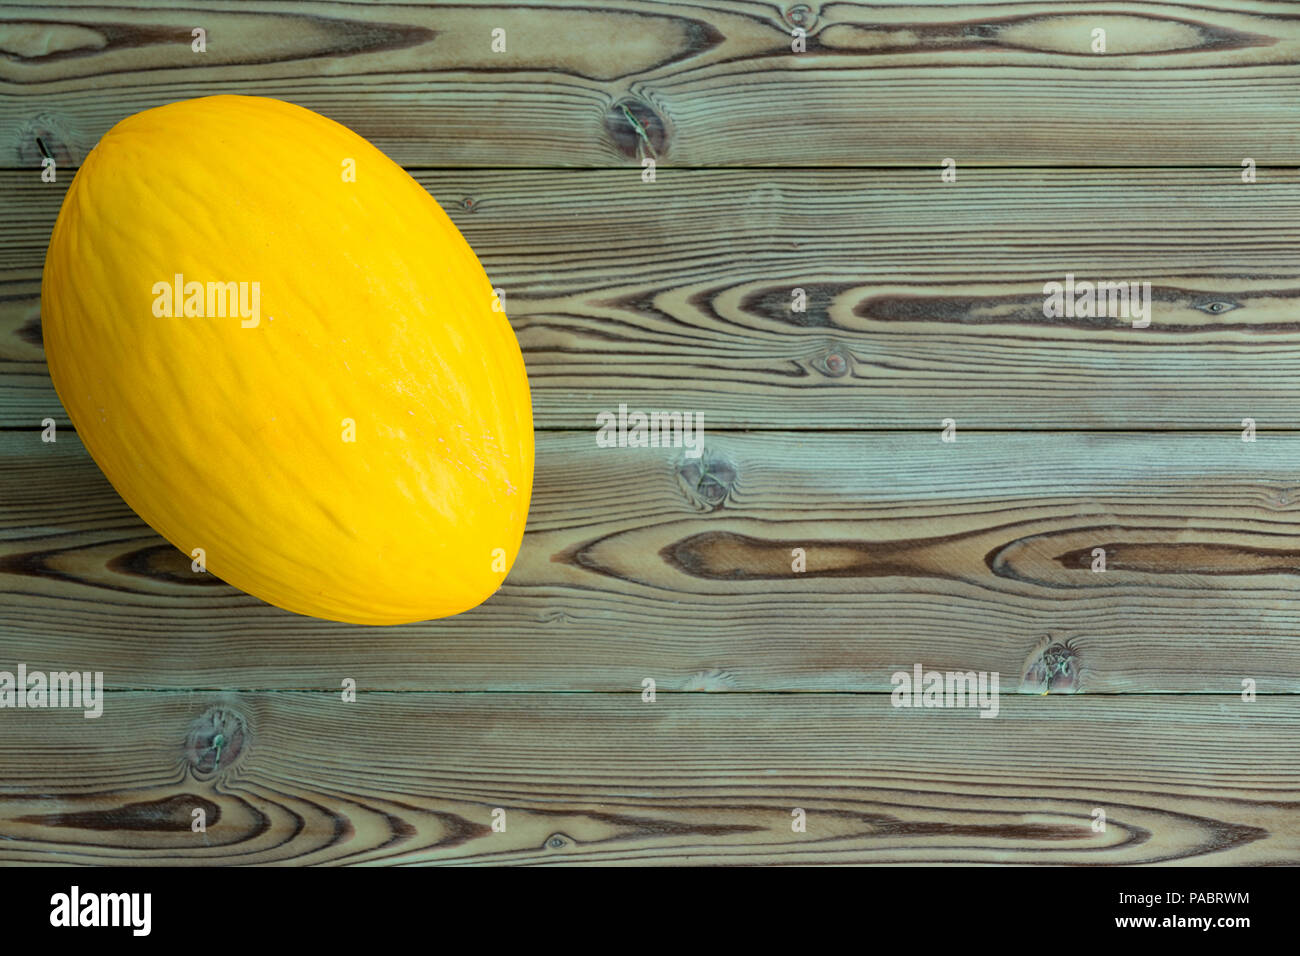 Whole colorful ripe yellow Canary melon, Cucumis melo, on a wooden picnic table ready to be eaten for a refreshing juicy dessert viewed from above wit Stock Photo